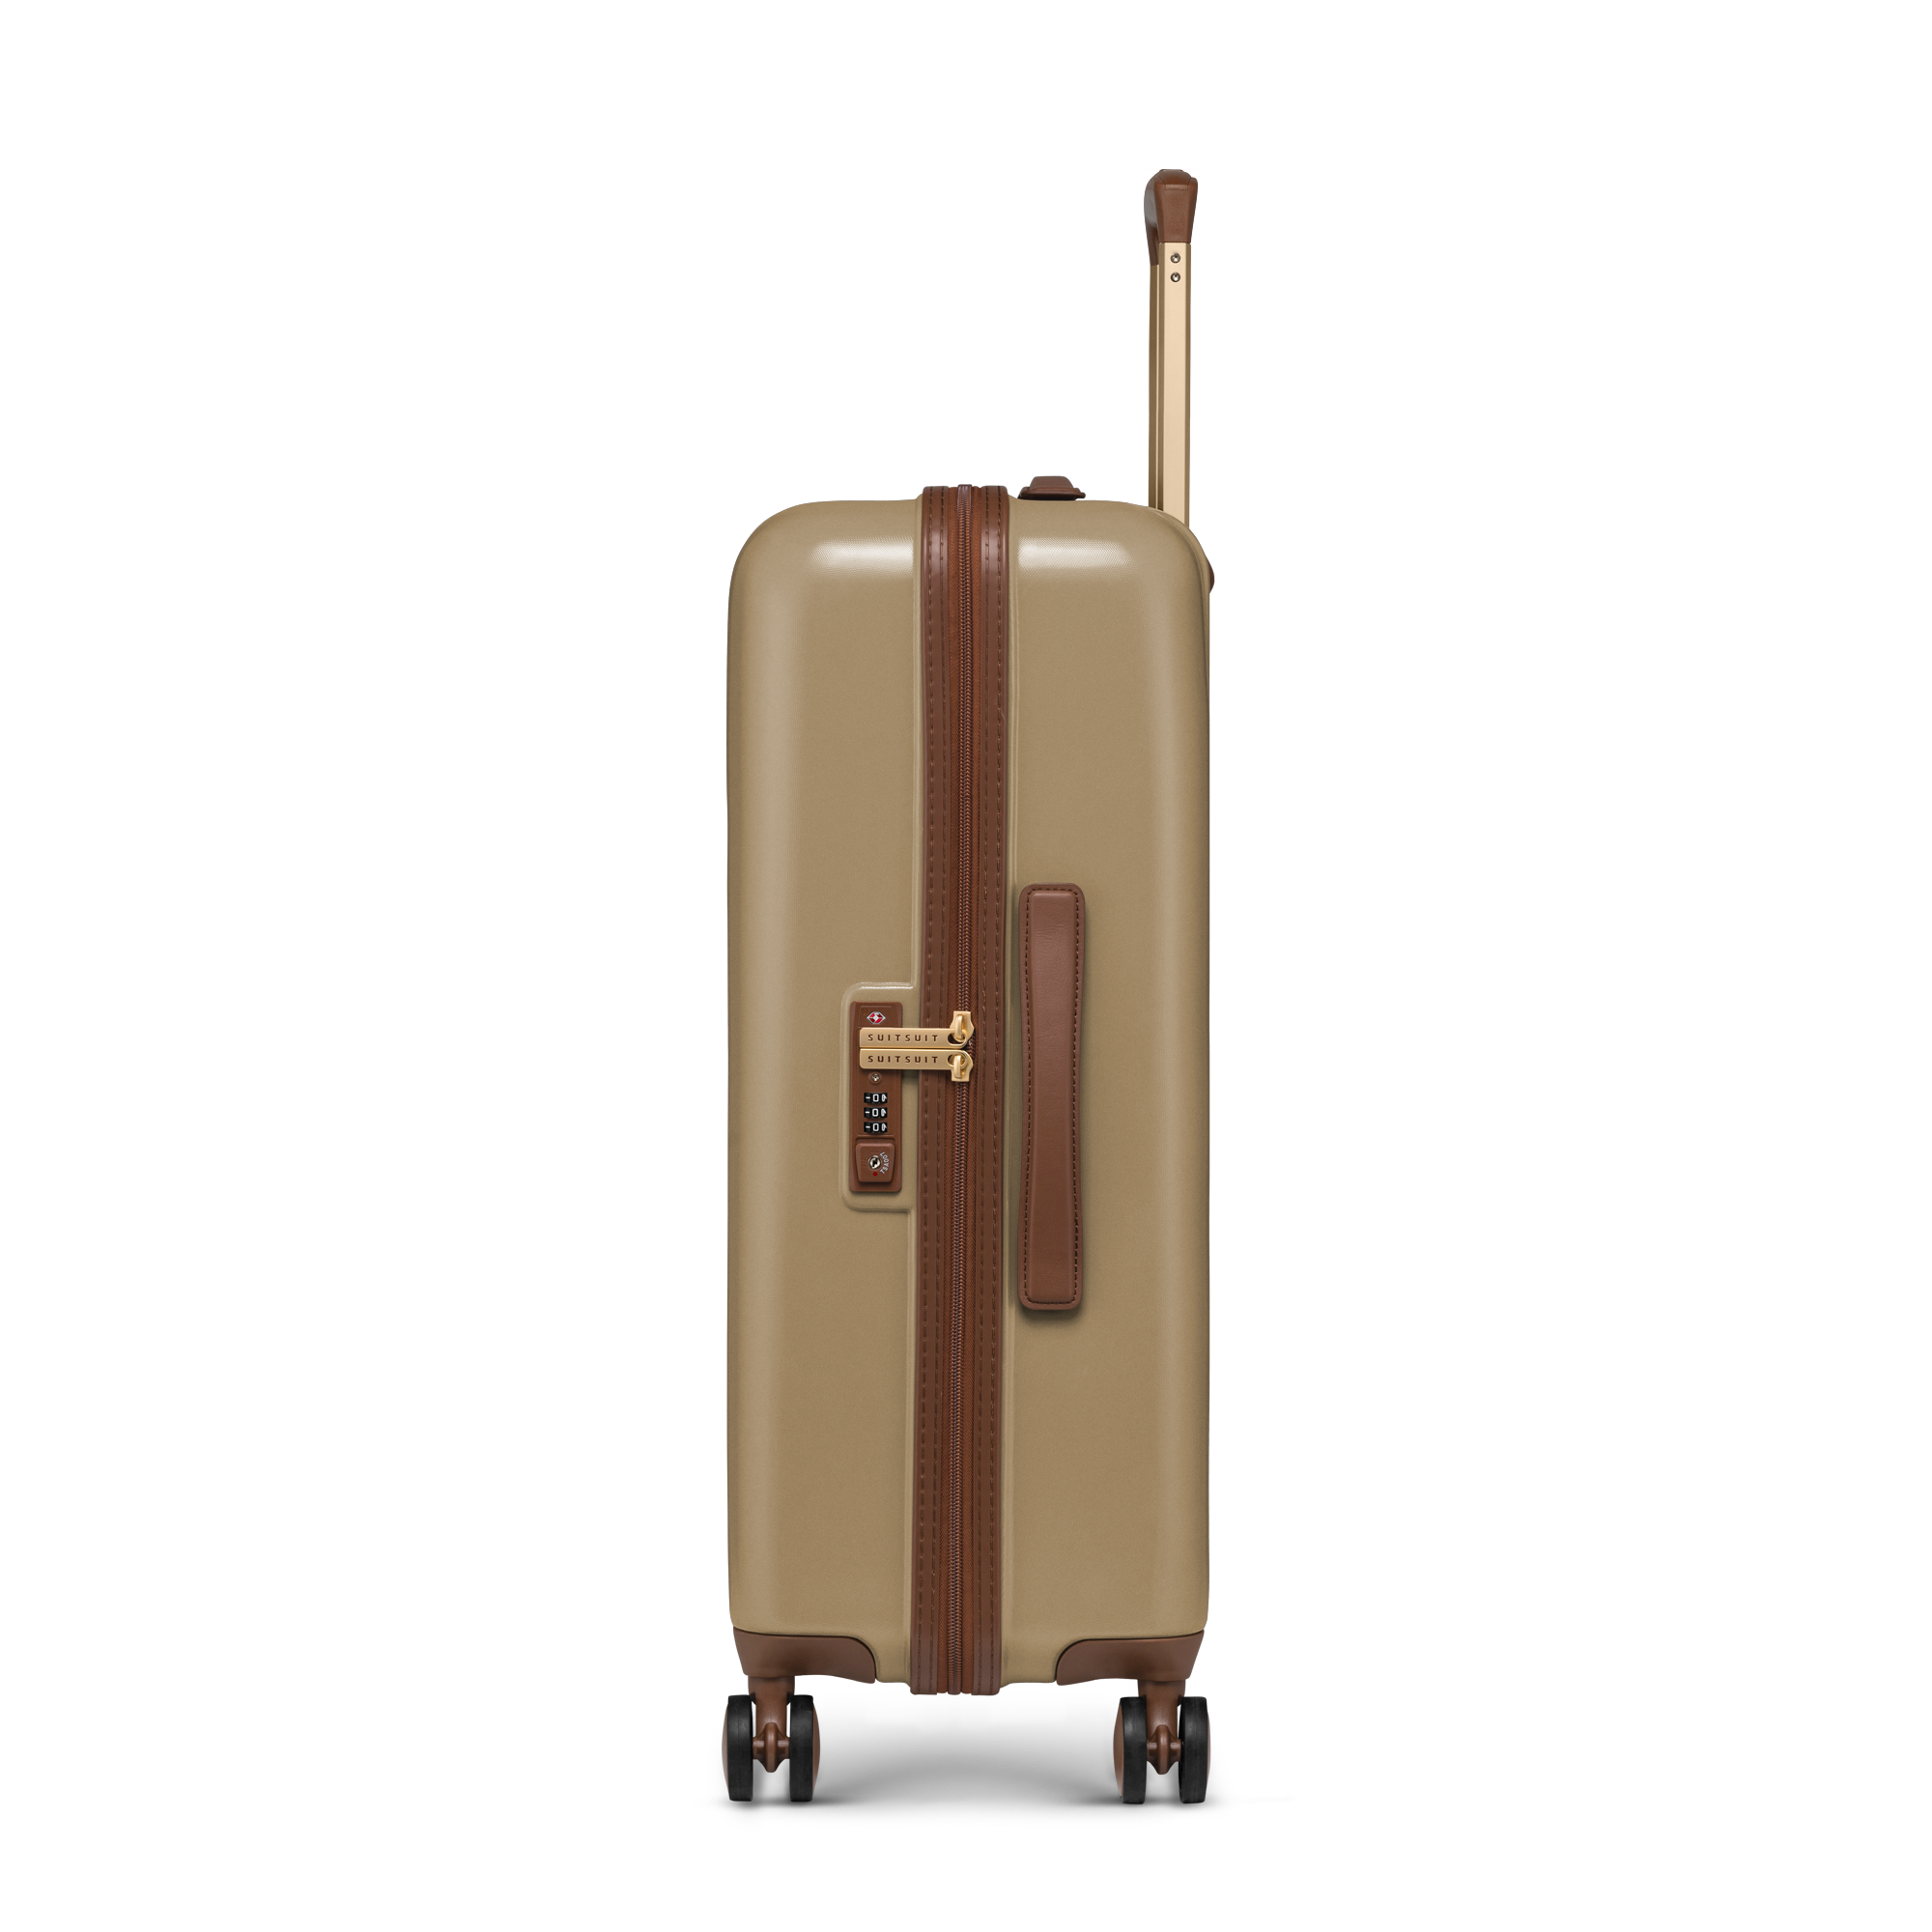 Fab Seventies - Cuban Sand - Check-in (24 inch)